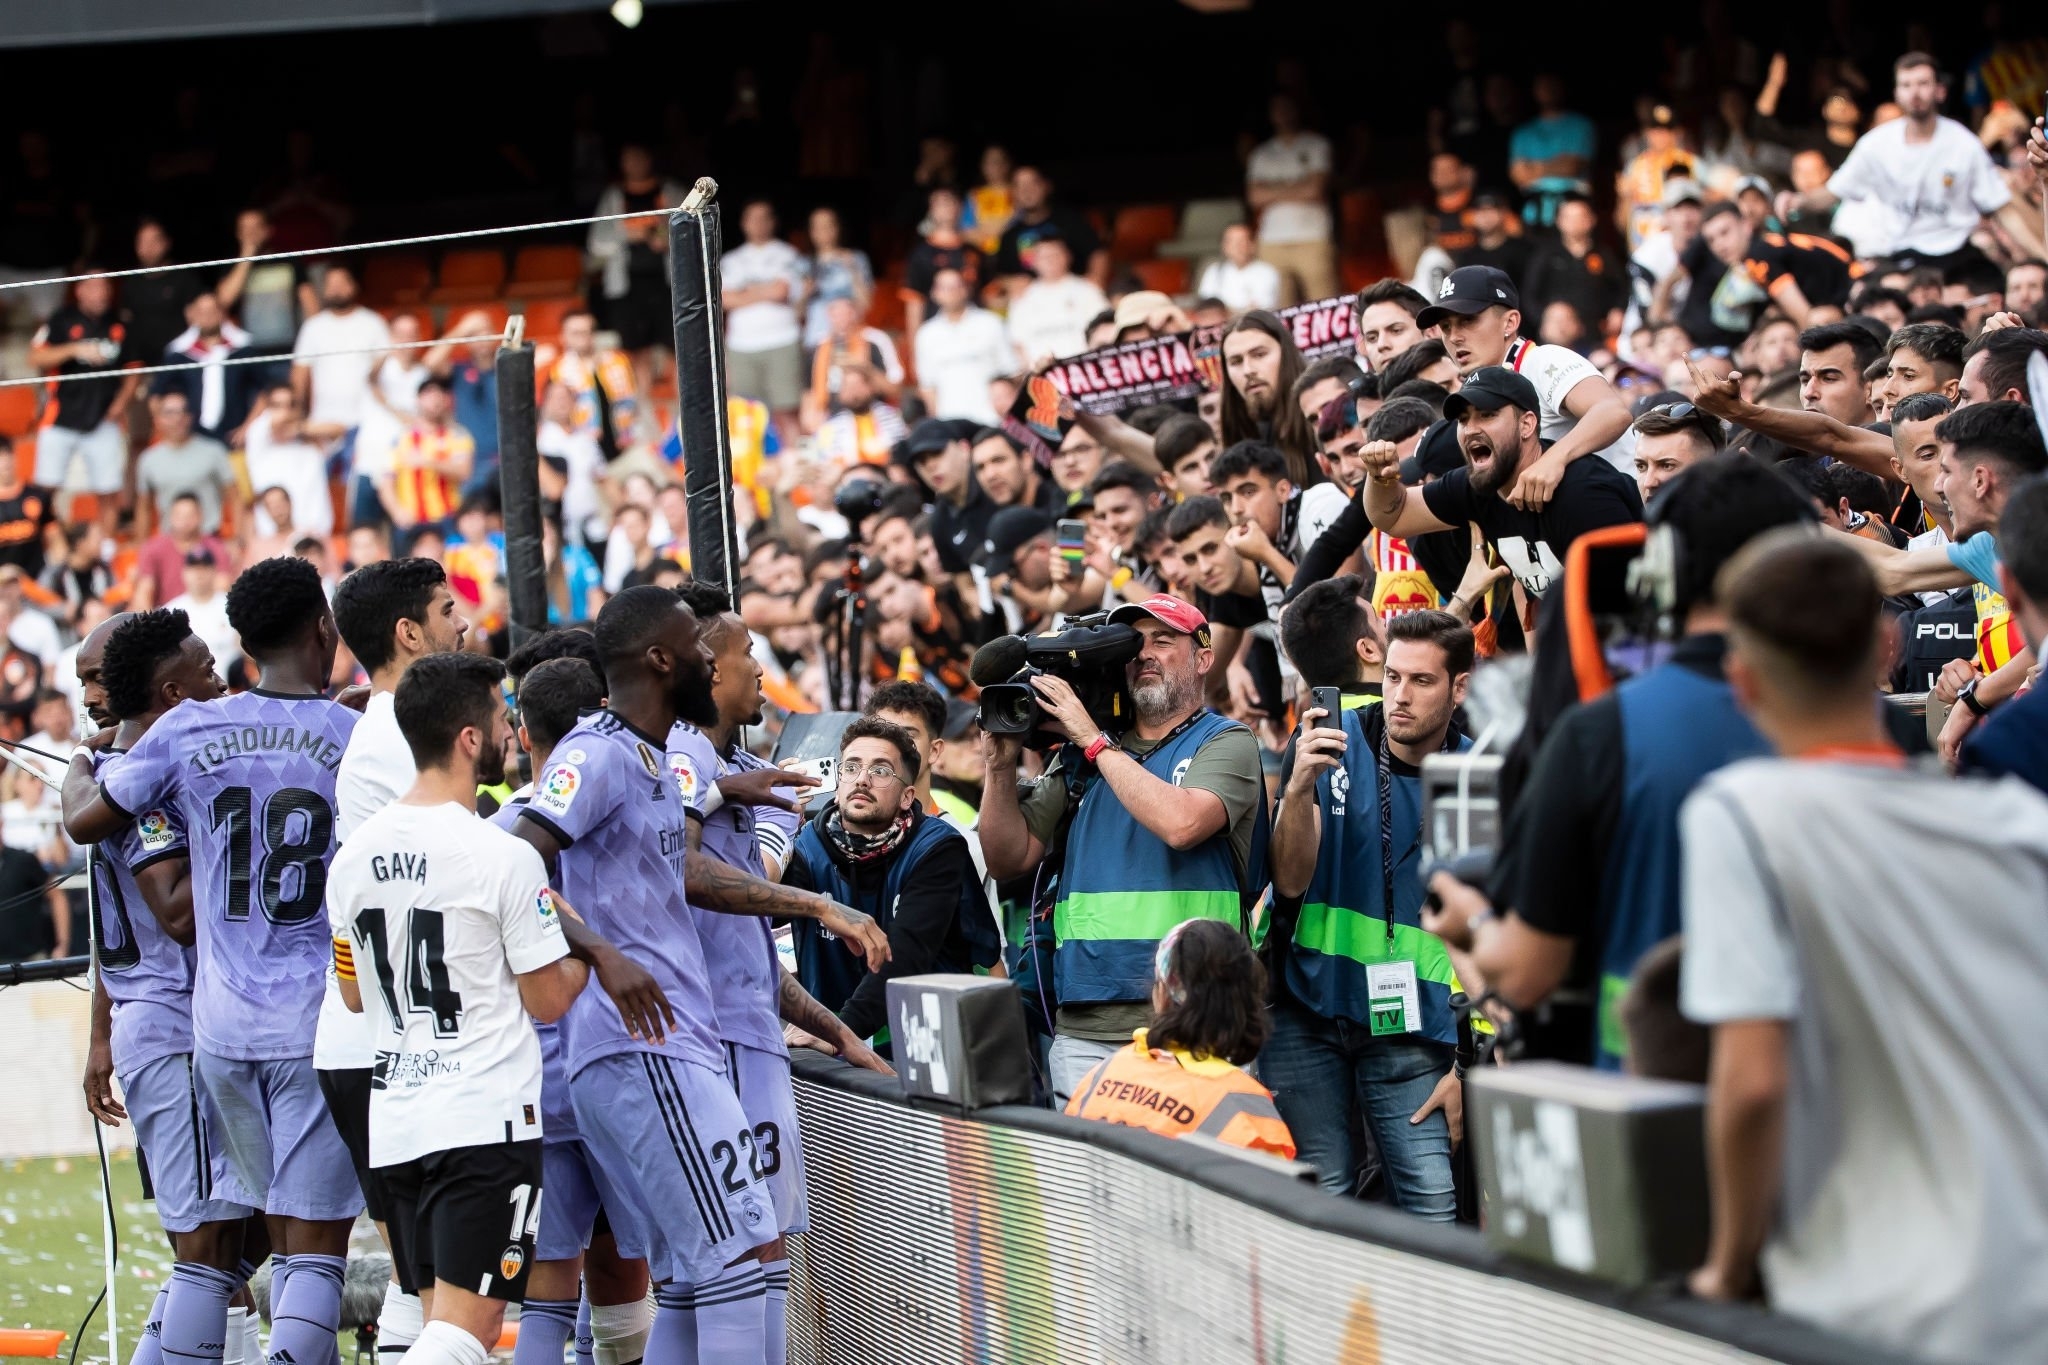 Vinicius Jr Racial Abuse, Valencia punishment reduced after appeal, Valencia vs Real Madrid, Valencia vs Vinicius Jr, Valencia fine, La Liga, Javier Tebas